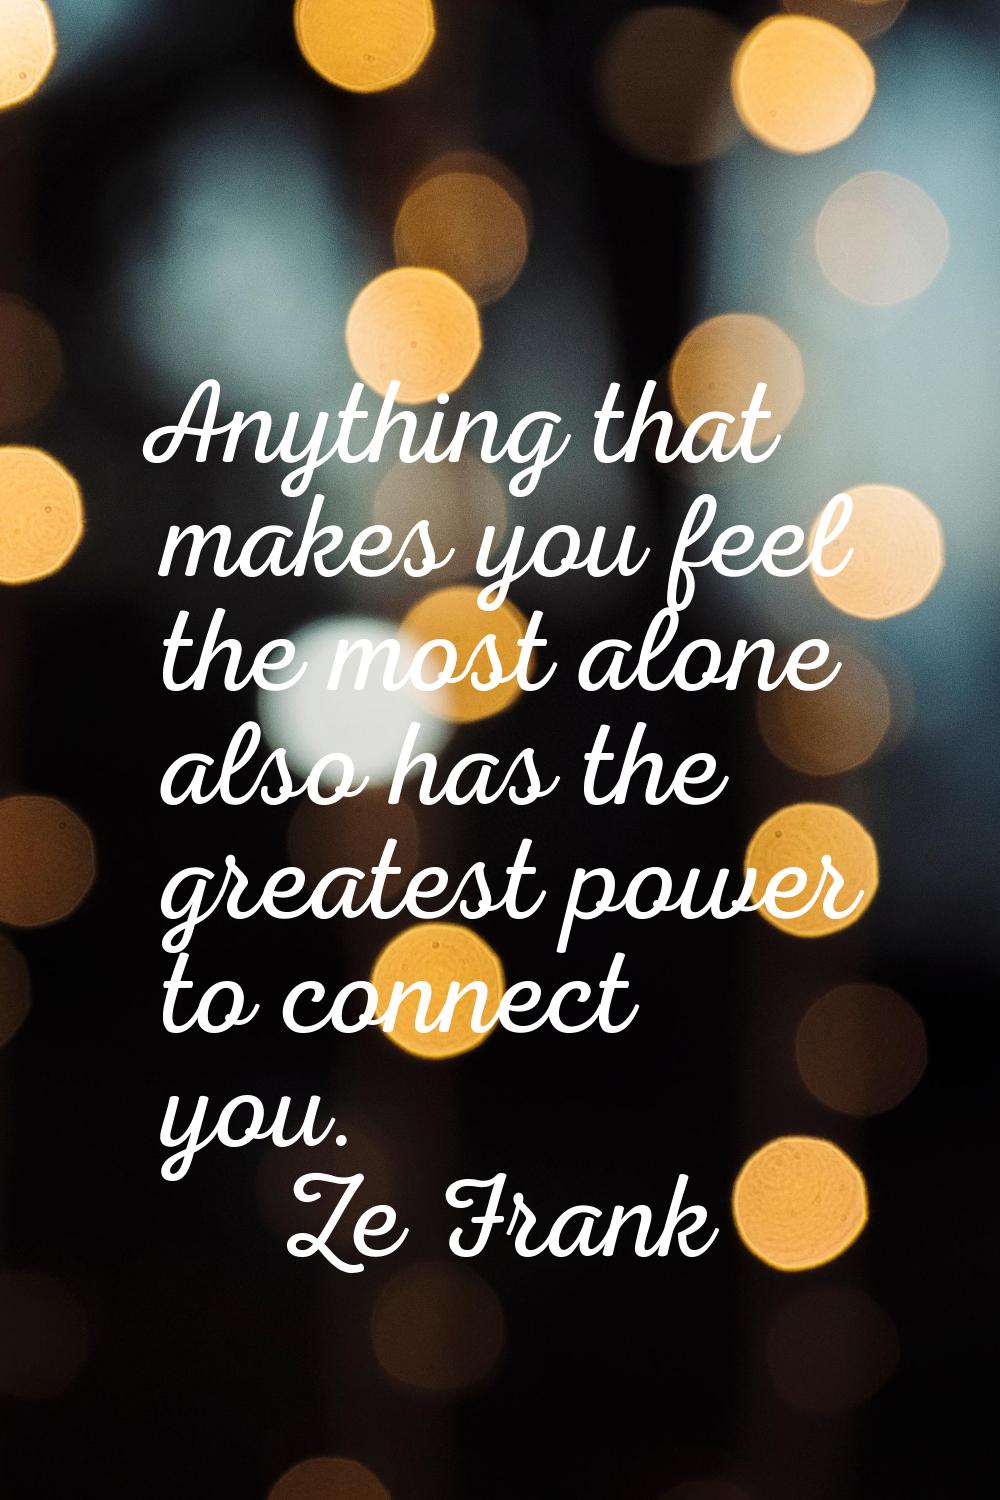 Anything that makes you feel the most alone also has the greatest power to connect you.